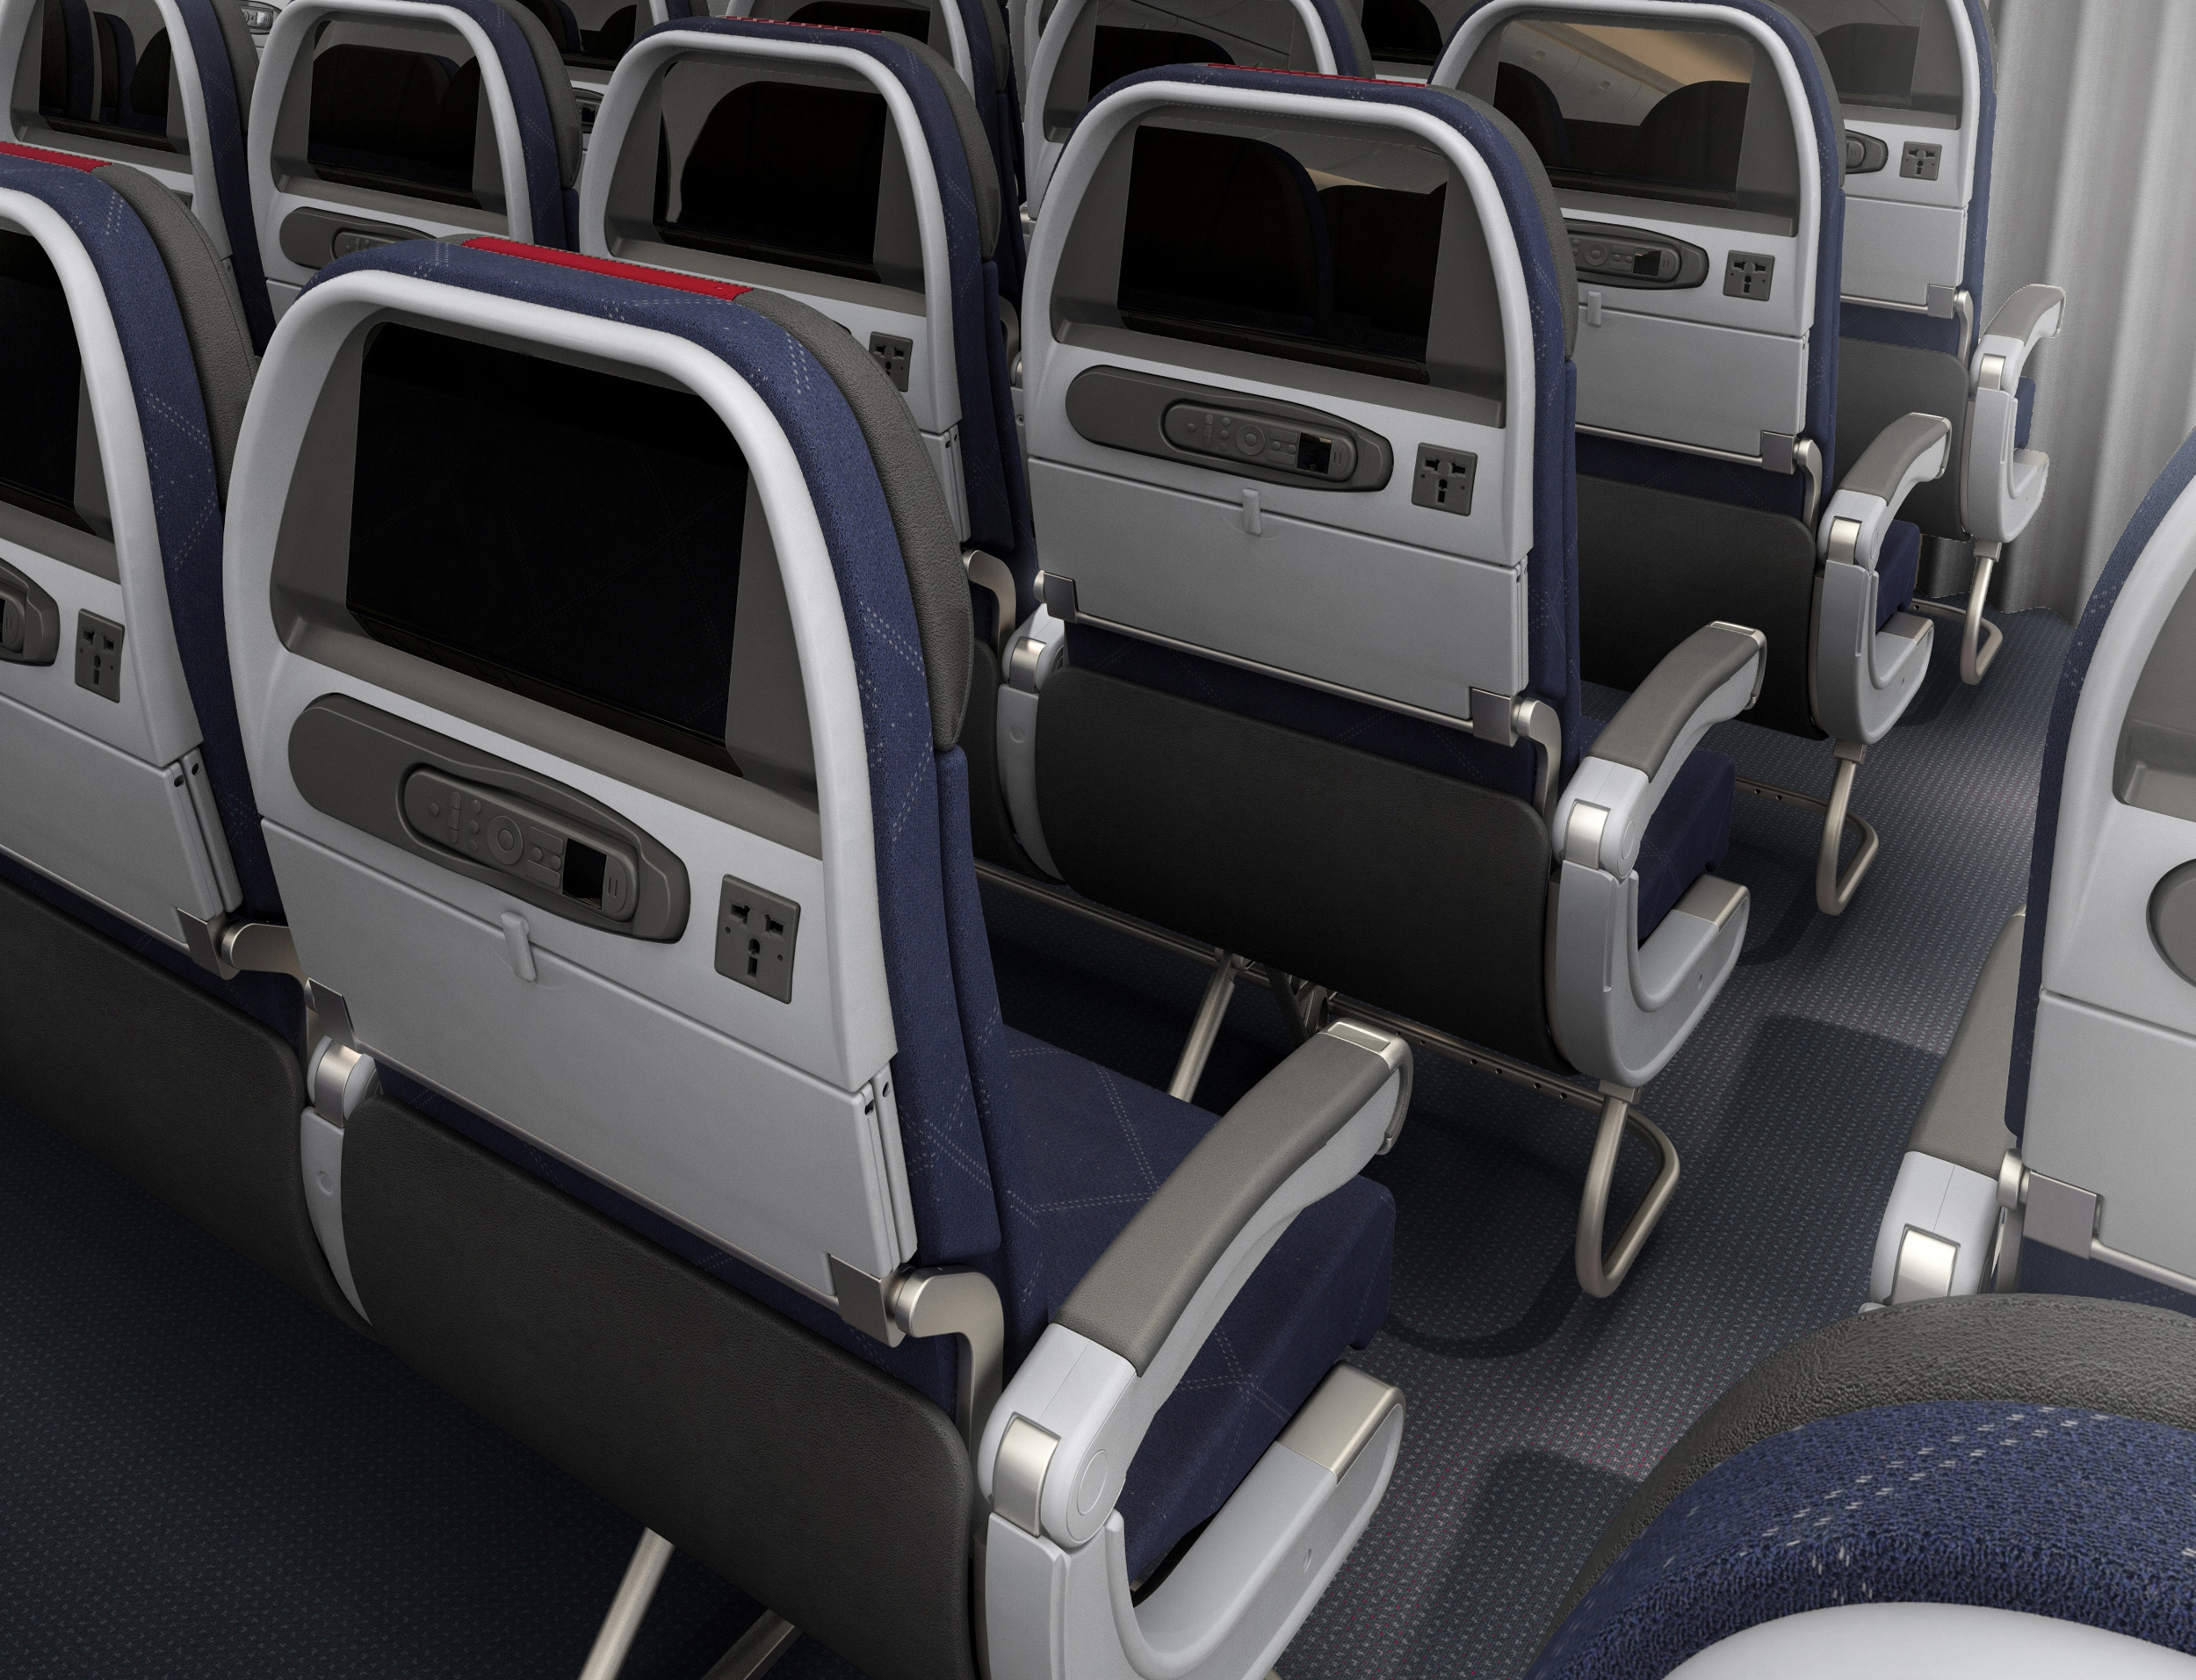 American Airlines Shows Off New Boeing 777 300er Interior